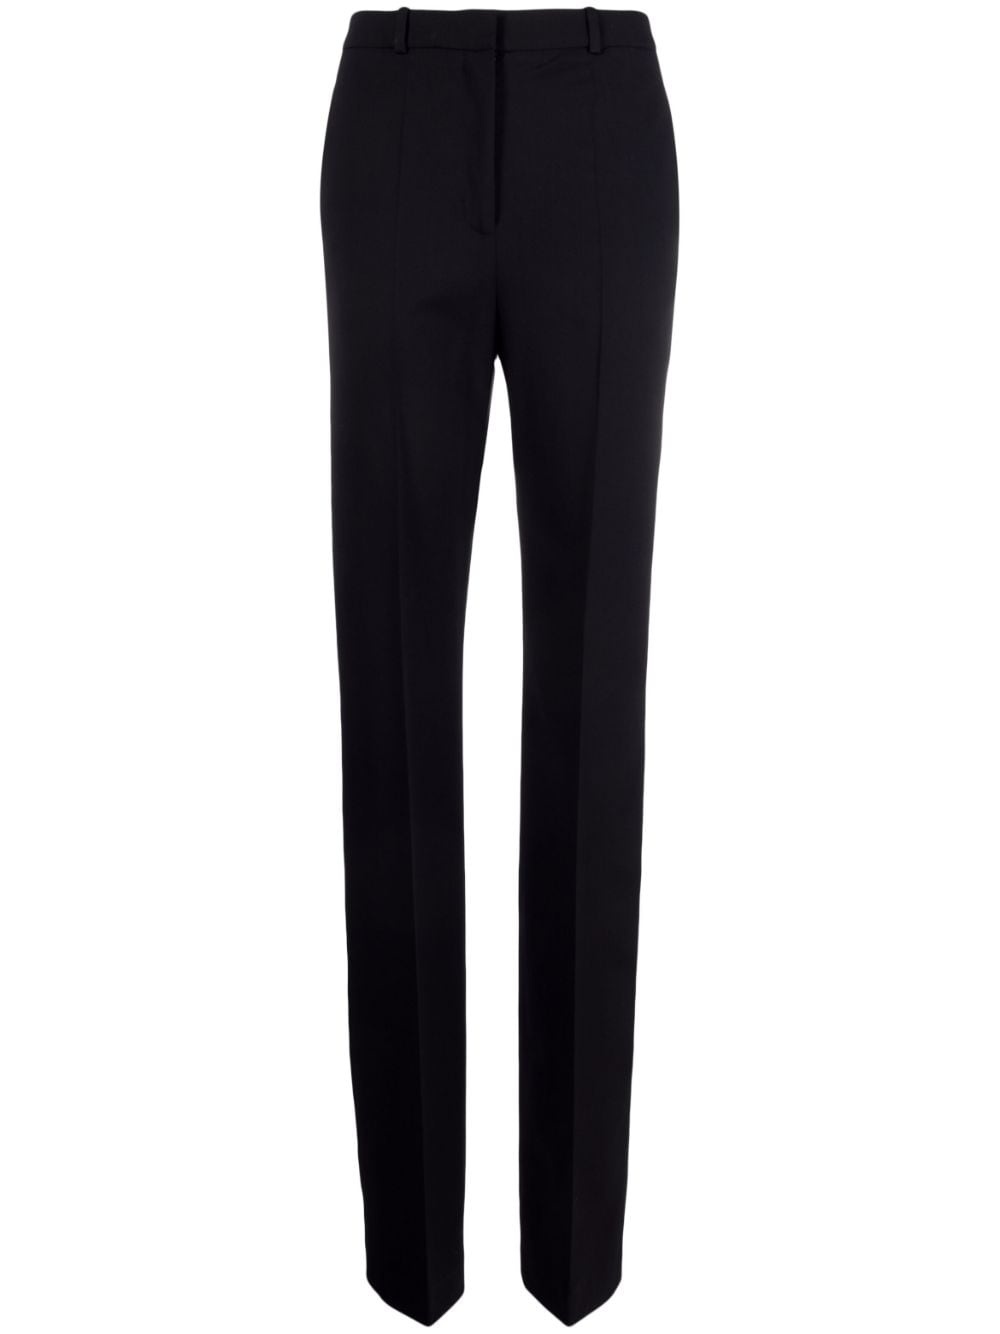 pressed-crease tailored-cut trousers - 1